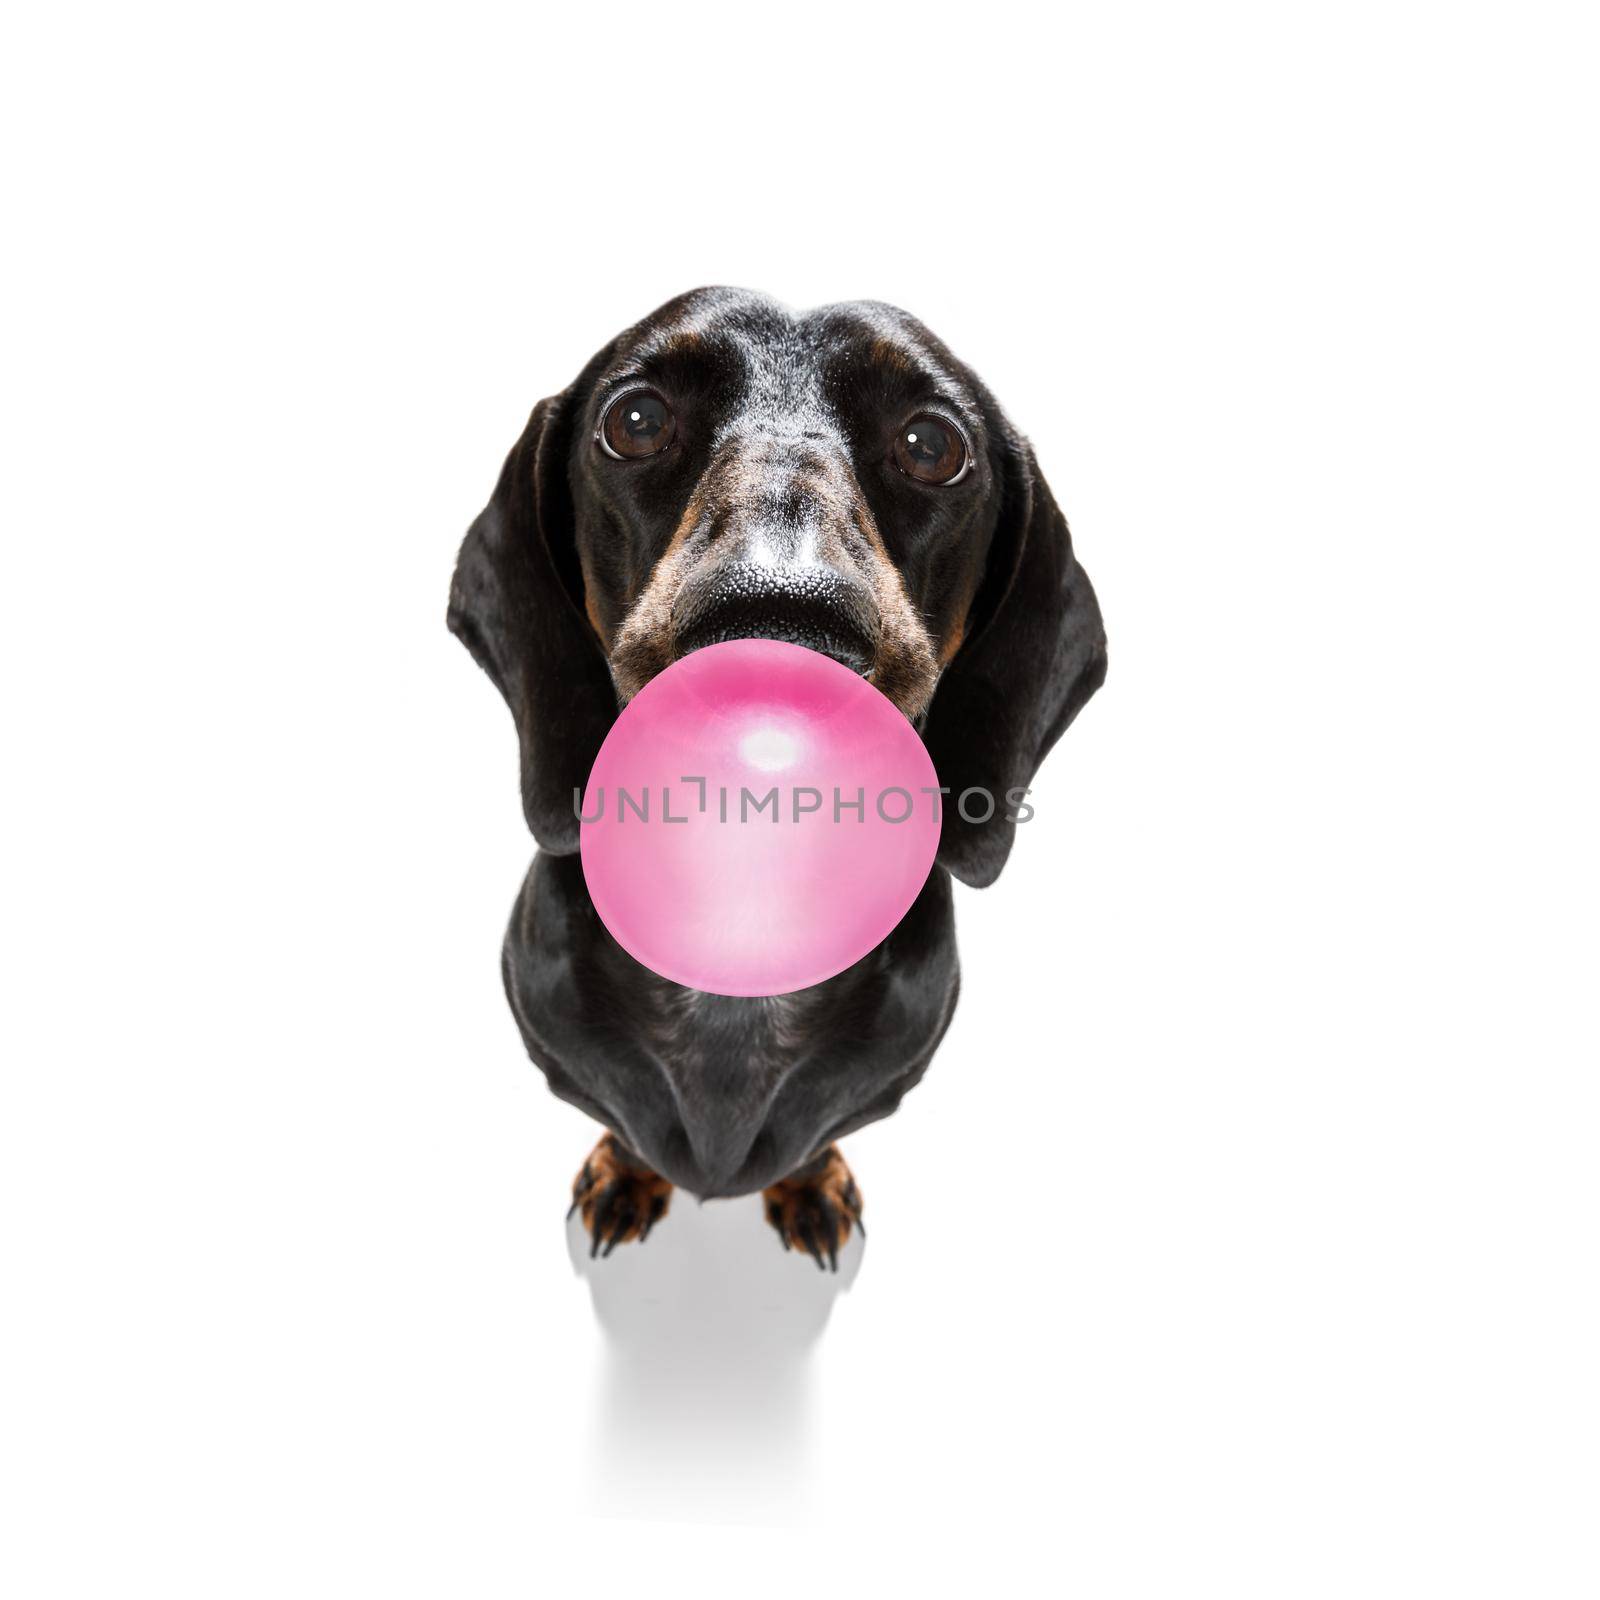 curious dachshund sausage dog  looking up to owner waiting or sitting patient to play or go for a walk with  chewing bubble gum ,   isolated on white background